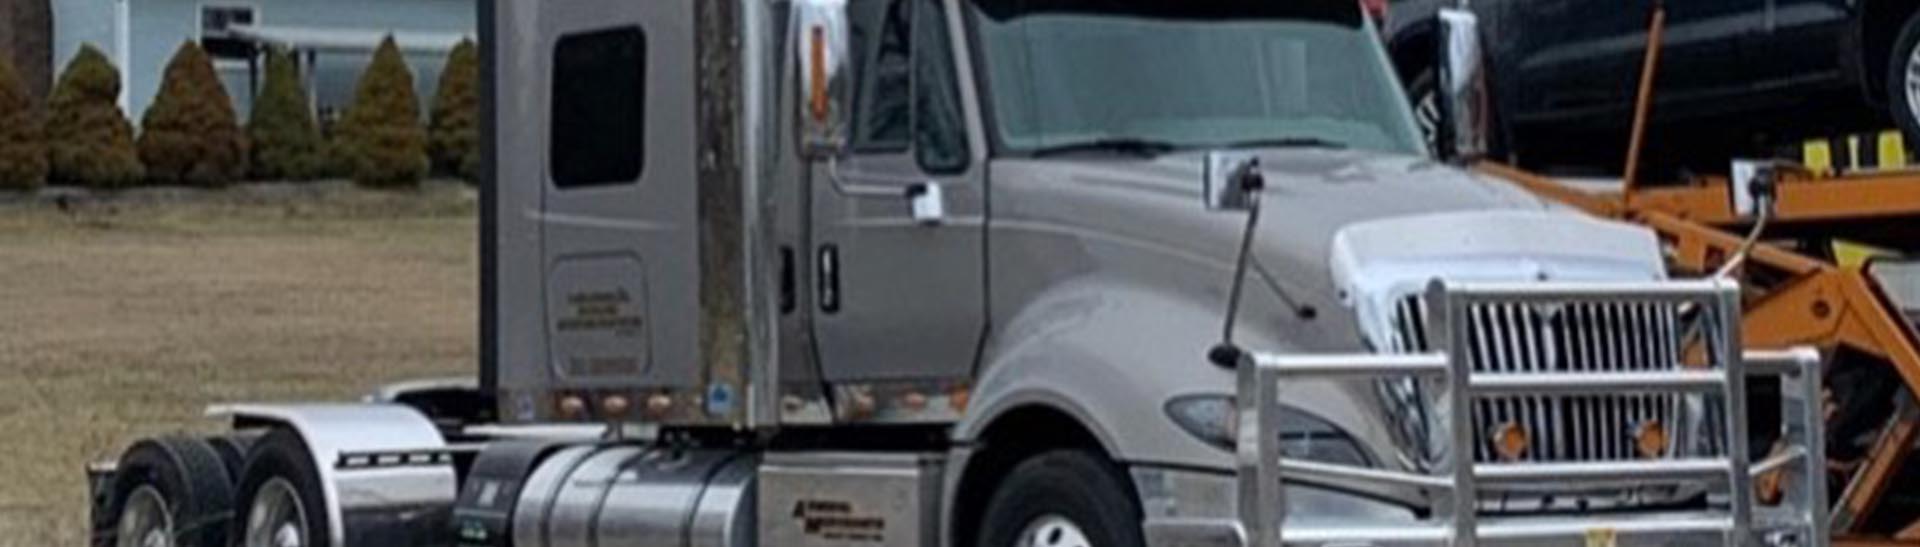 Cincinnati Trucking Company, Trucking Services and Freight Forwarding Services